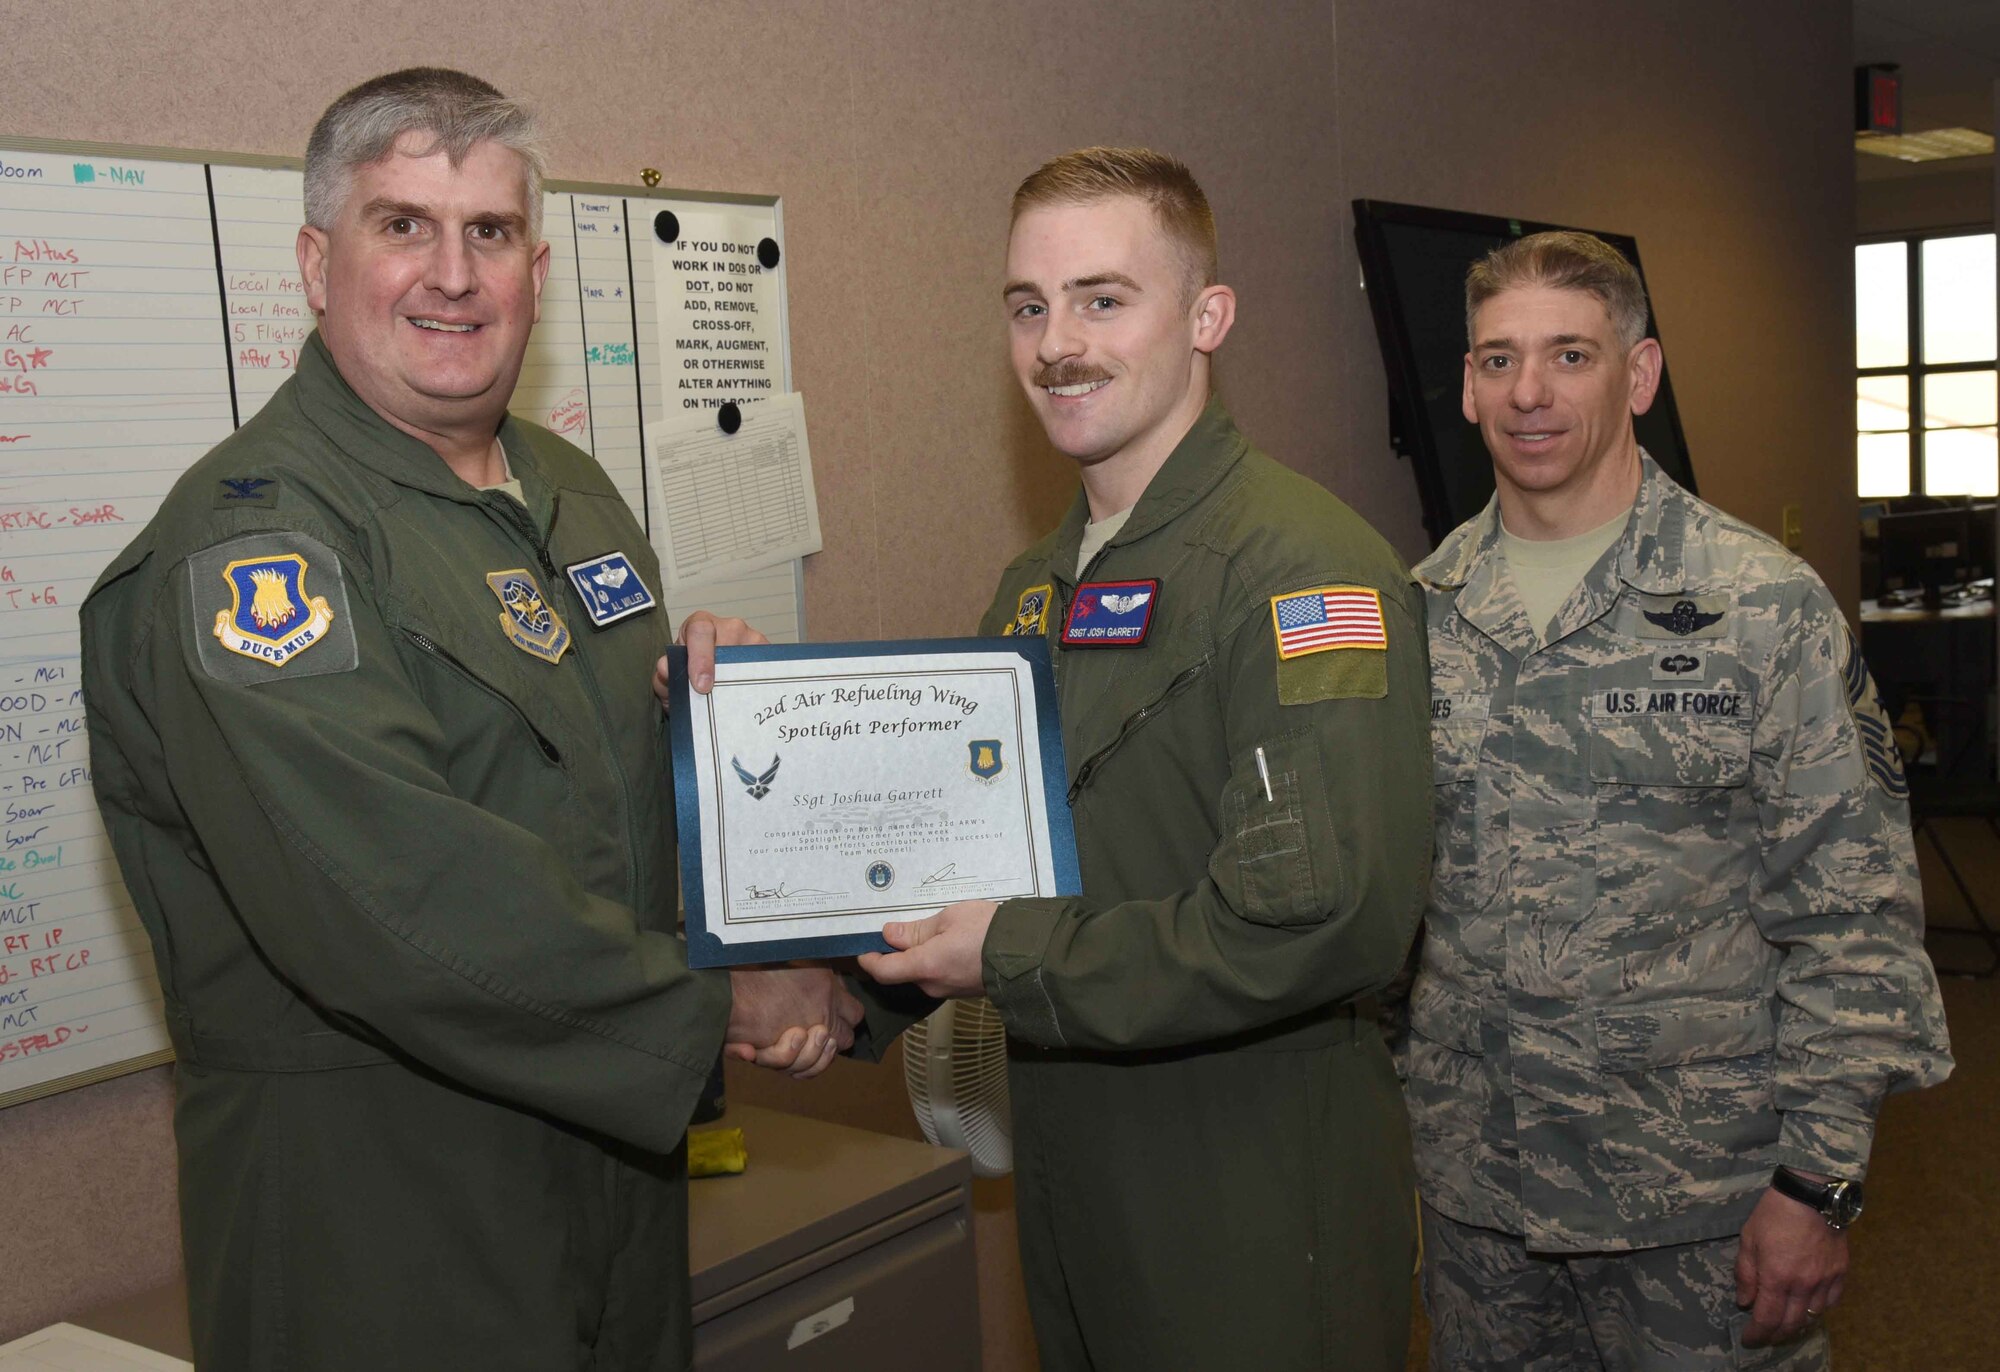 Staff Sgt. Josh Garrett, 350th Air Refueling Squadron instructor boom operator, poses with Col. Albert Miller, 22nd Air Refueling Wing commander, and Chief Master Sgt. Shawn Hughes, 22nd ARW command chief, April 6, 2017, at McConnell Air Force Base, Kan. Garrett received the spotlight performer for the week of March 27-31. (U.S. Air Force photo/Airman 1st Class Erin McClellan)